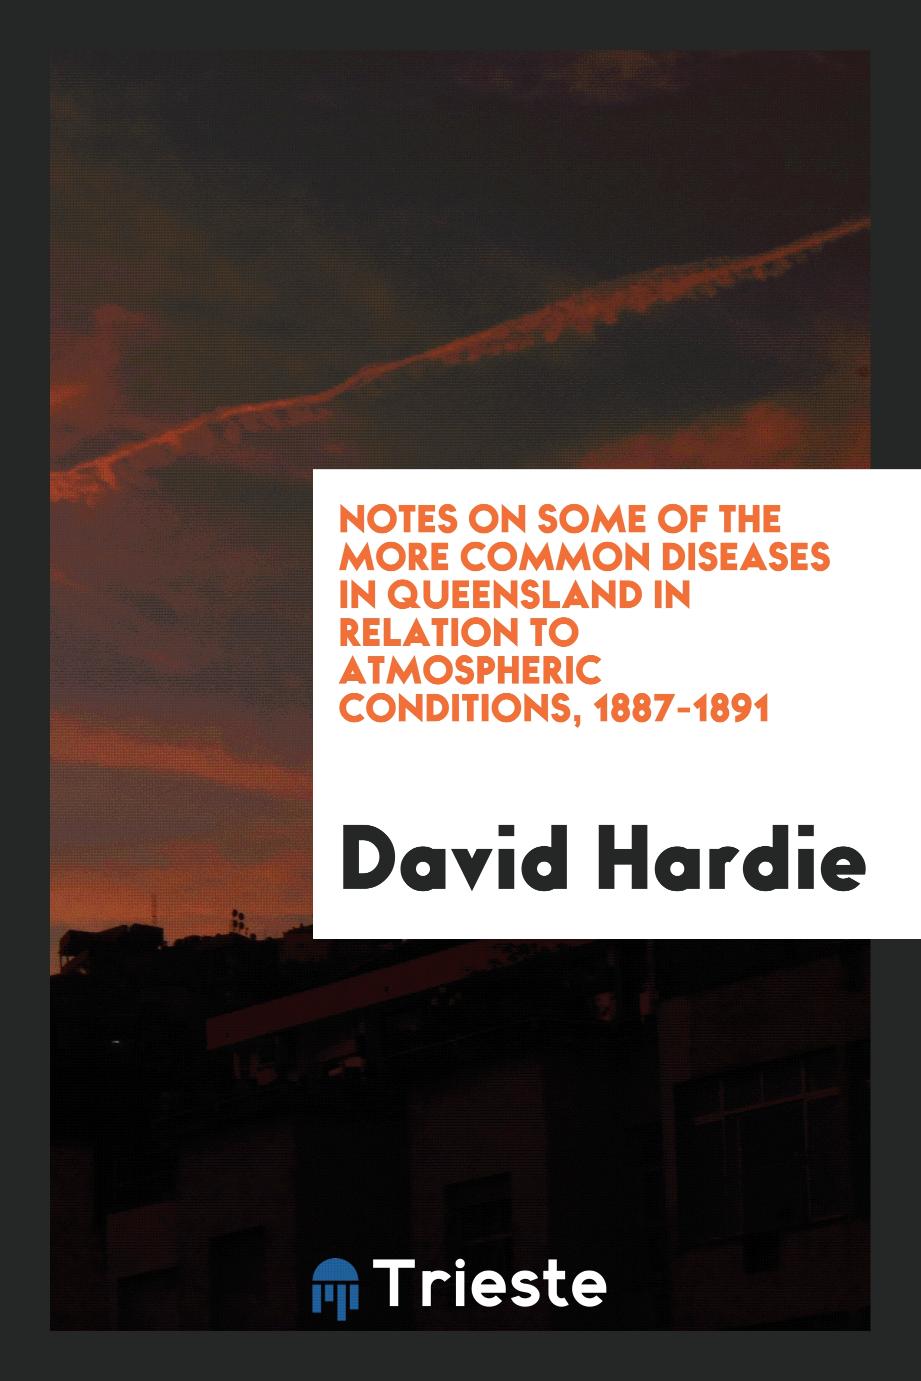 Notes on Some of the More Common Diseases in Queensland in Relation to Atmospheric Conditions, 1887-1891